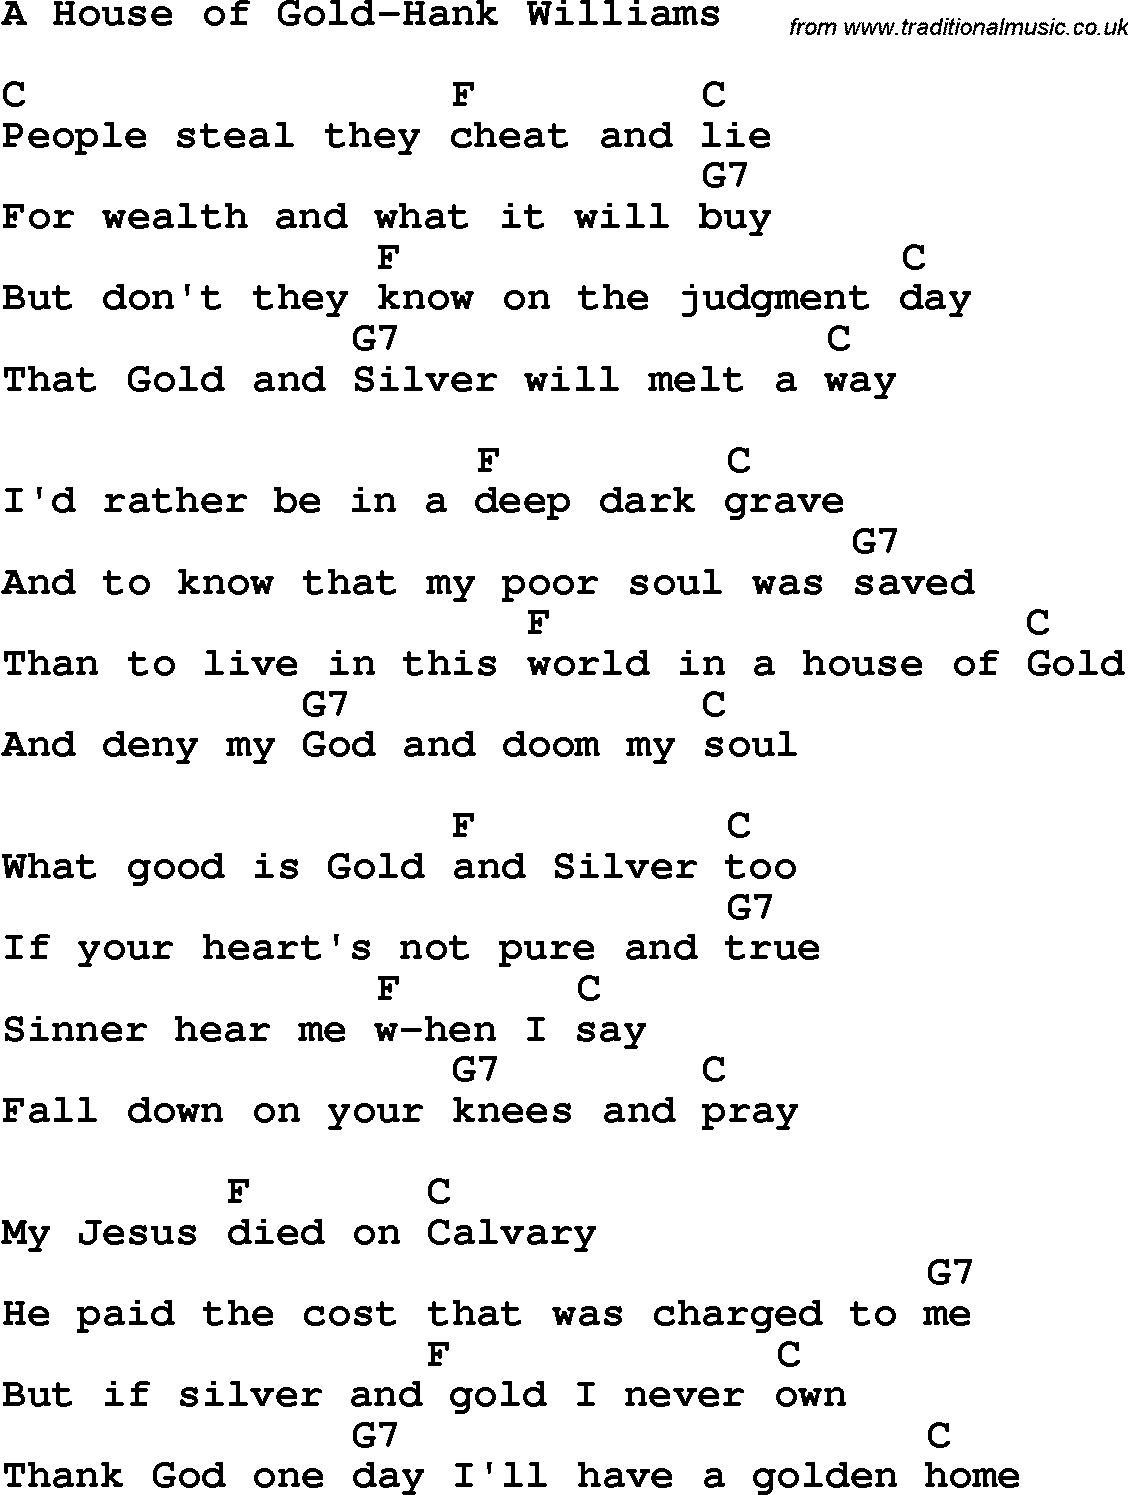 Country, Southern and Bluegrass Gospel Song A House of Gold-Hank Williams lyrics and chords